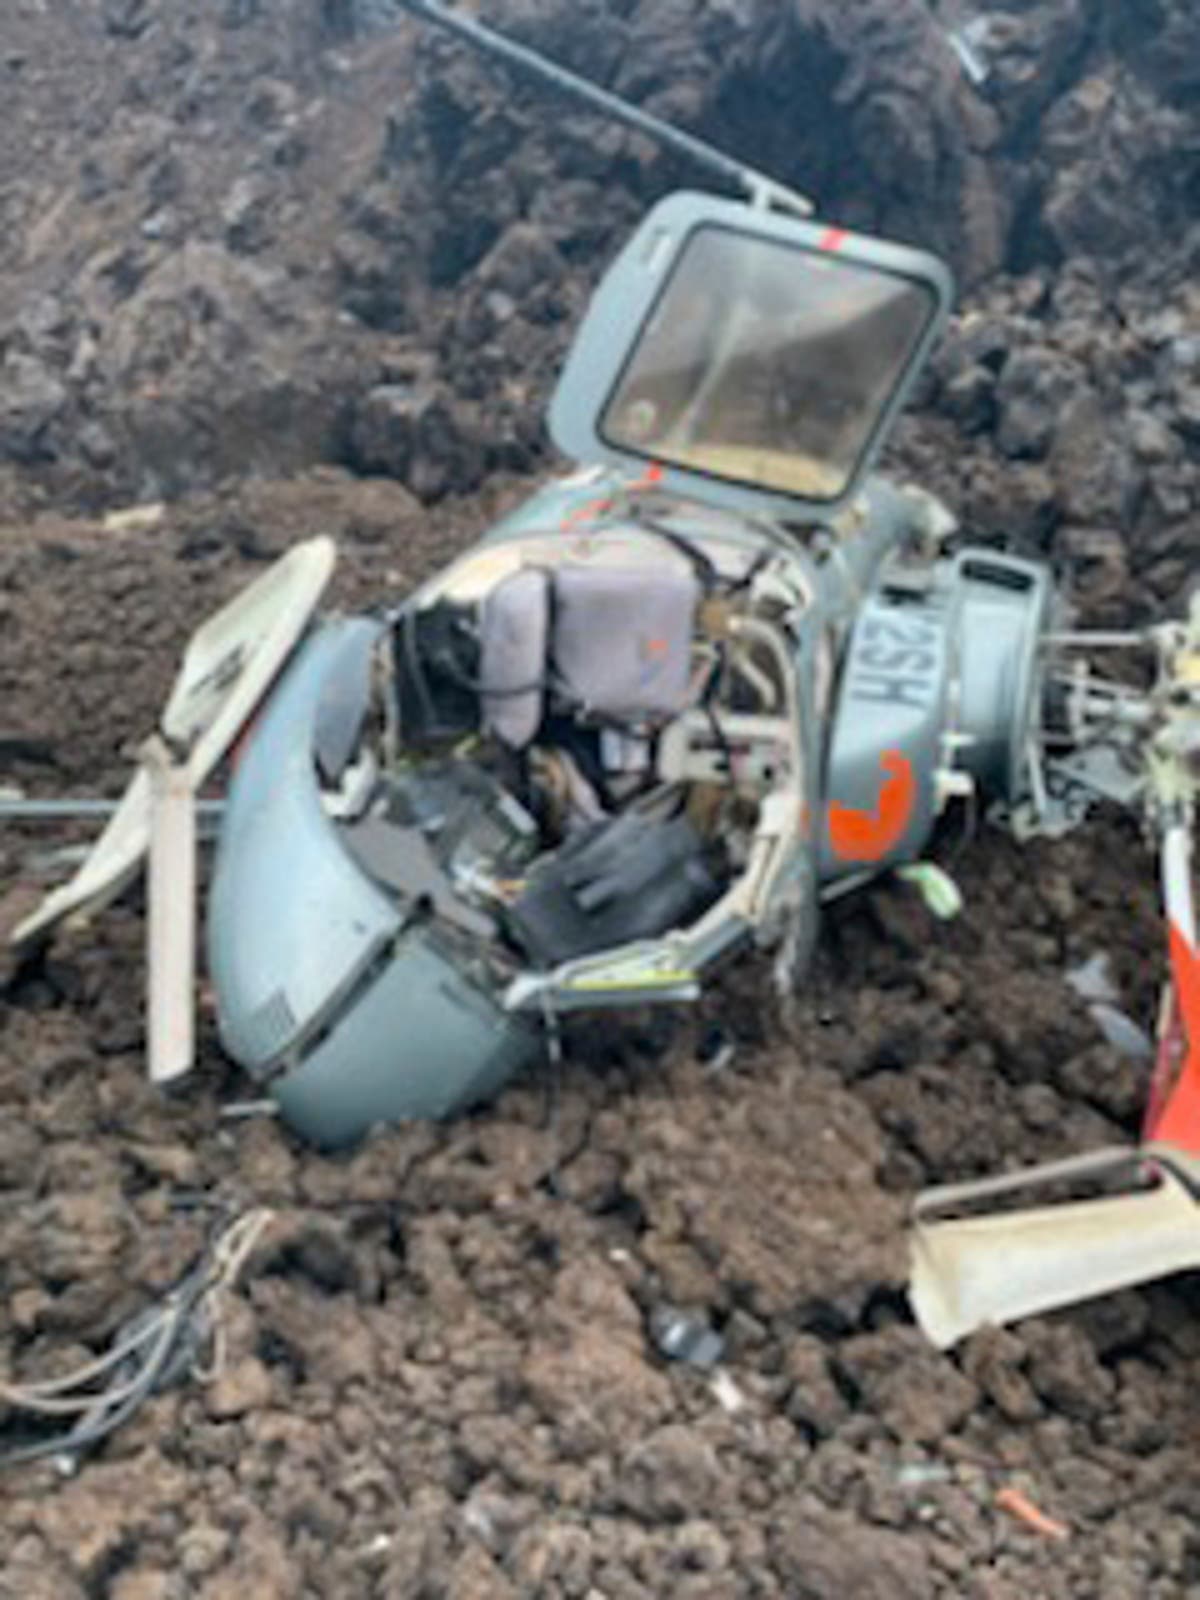 NTSB to investigate after 6 hurt in Hawaii helicopter crash